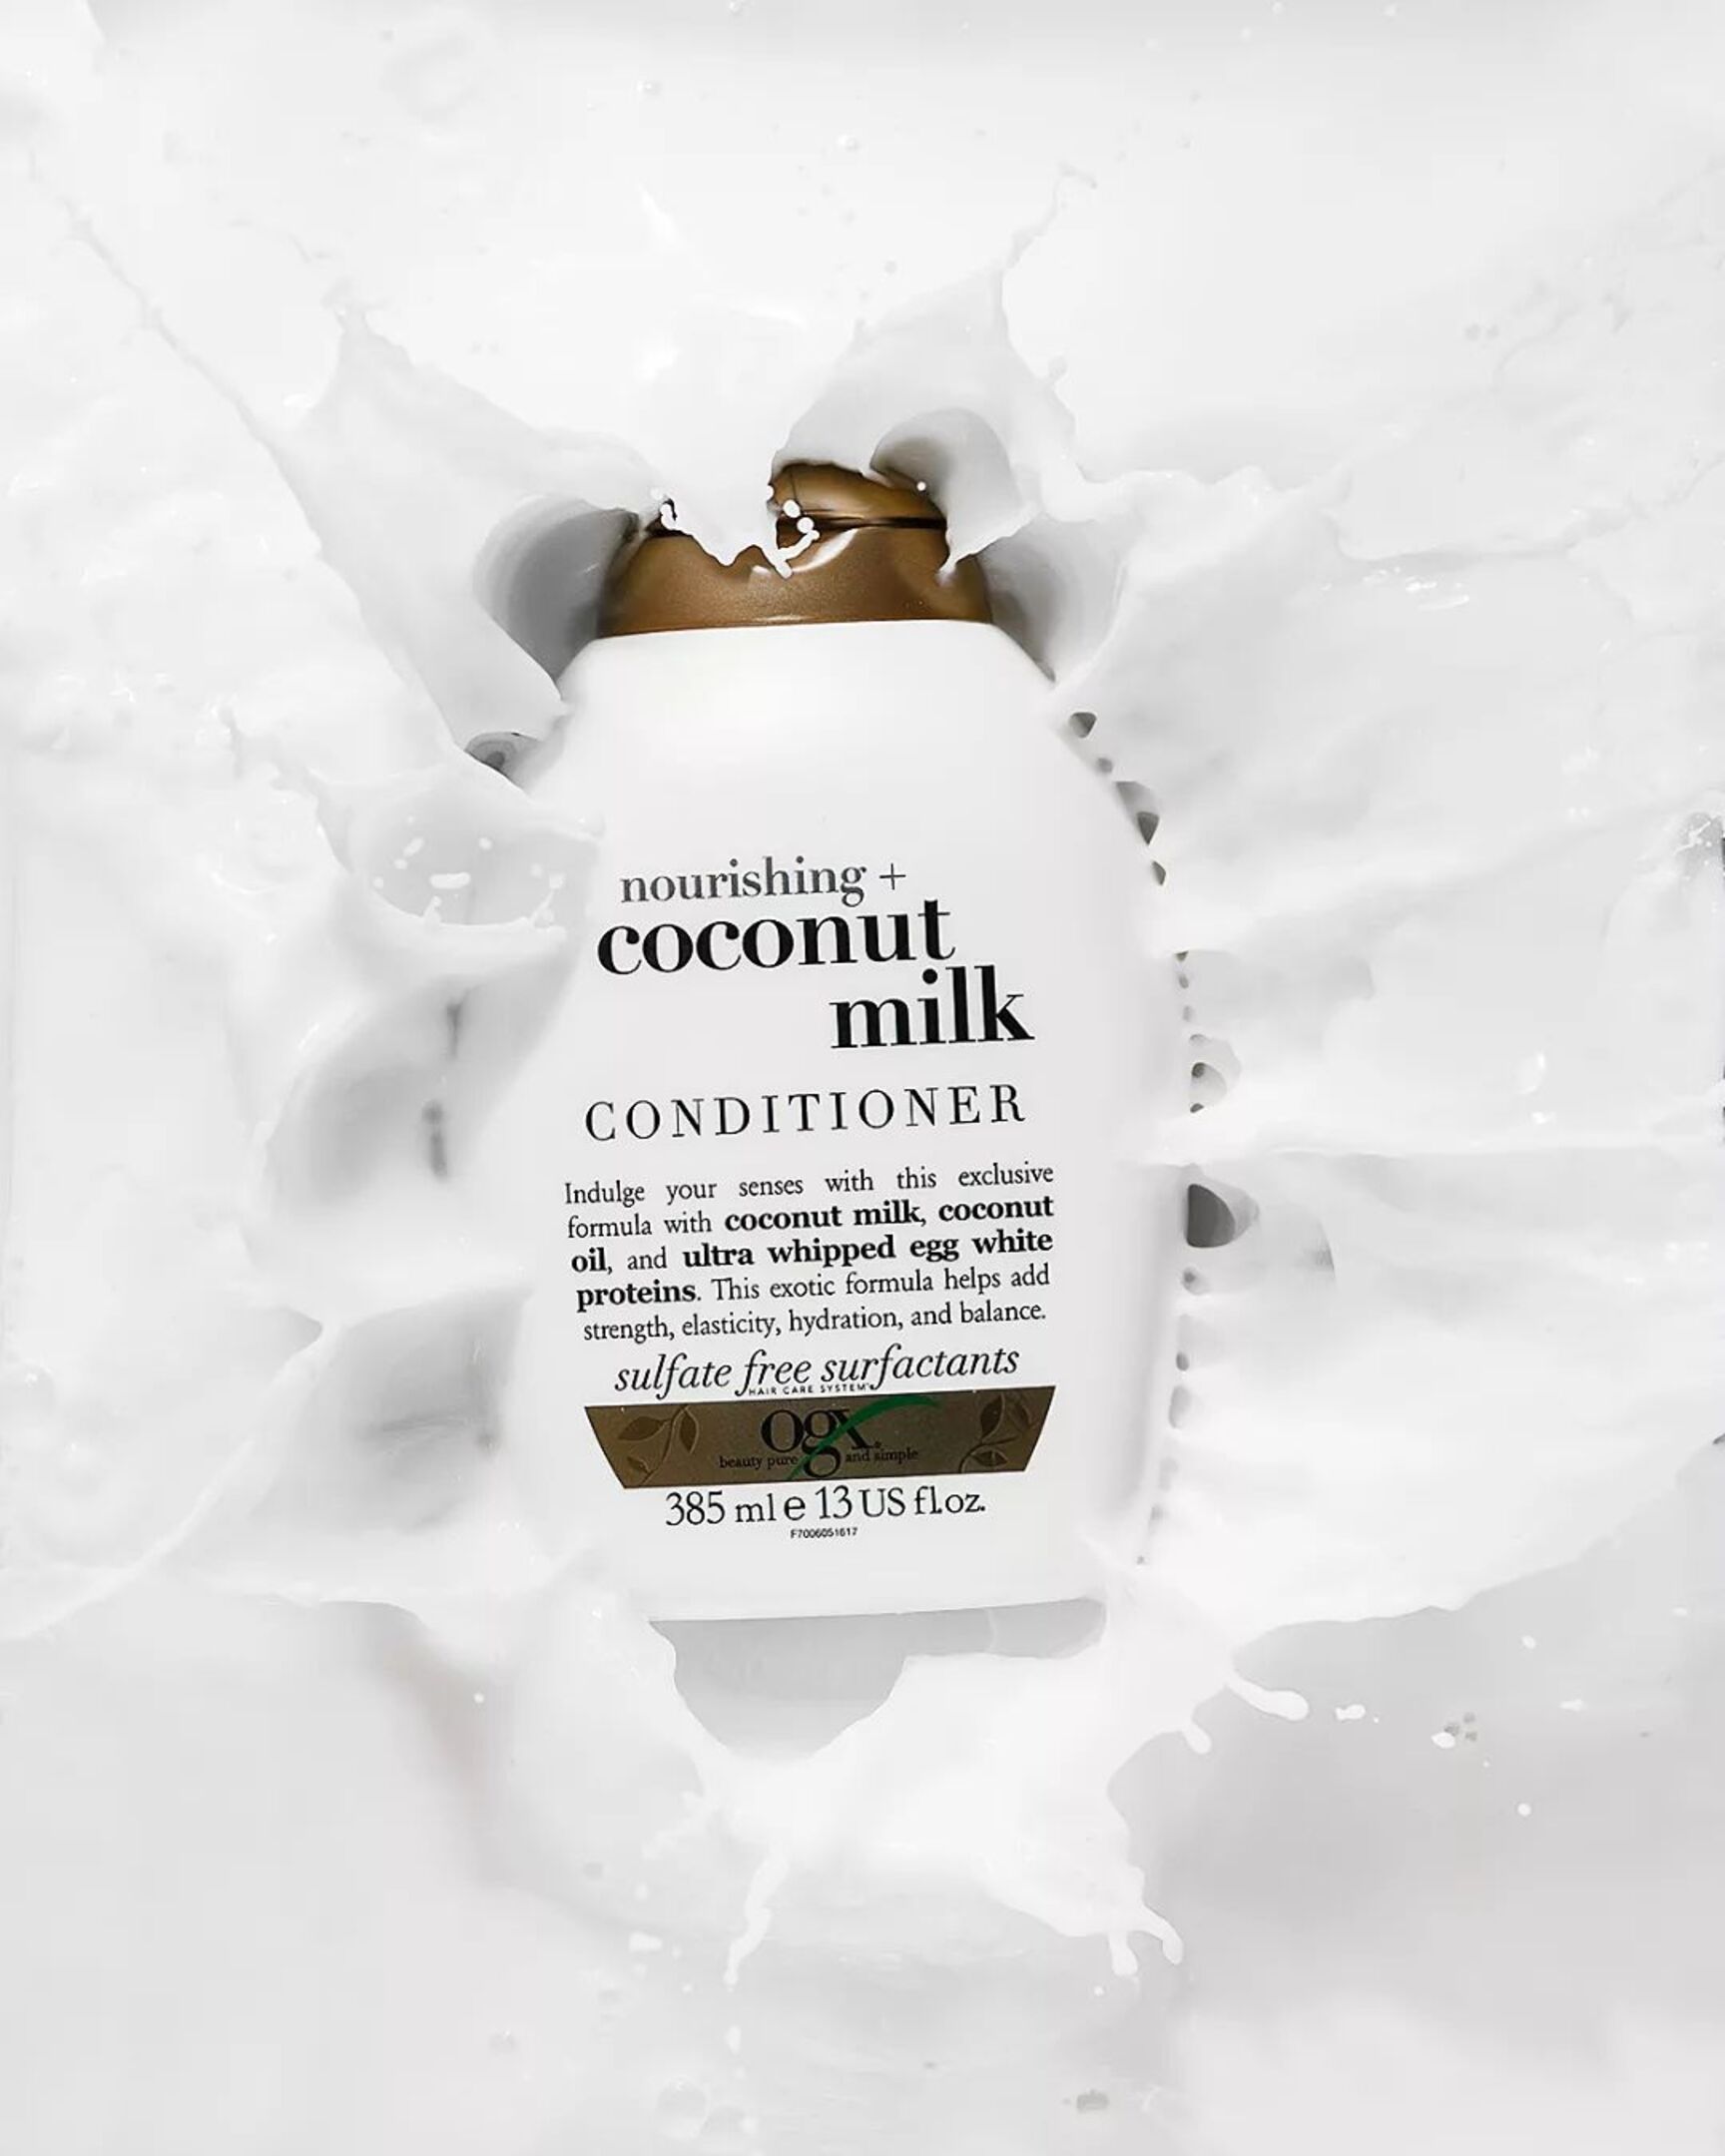 Nourishing Coconut Milk Conditioner - Ogx. The bottle is falling into coconut milk. Splashes are everywhere!